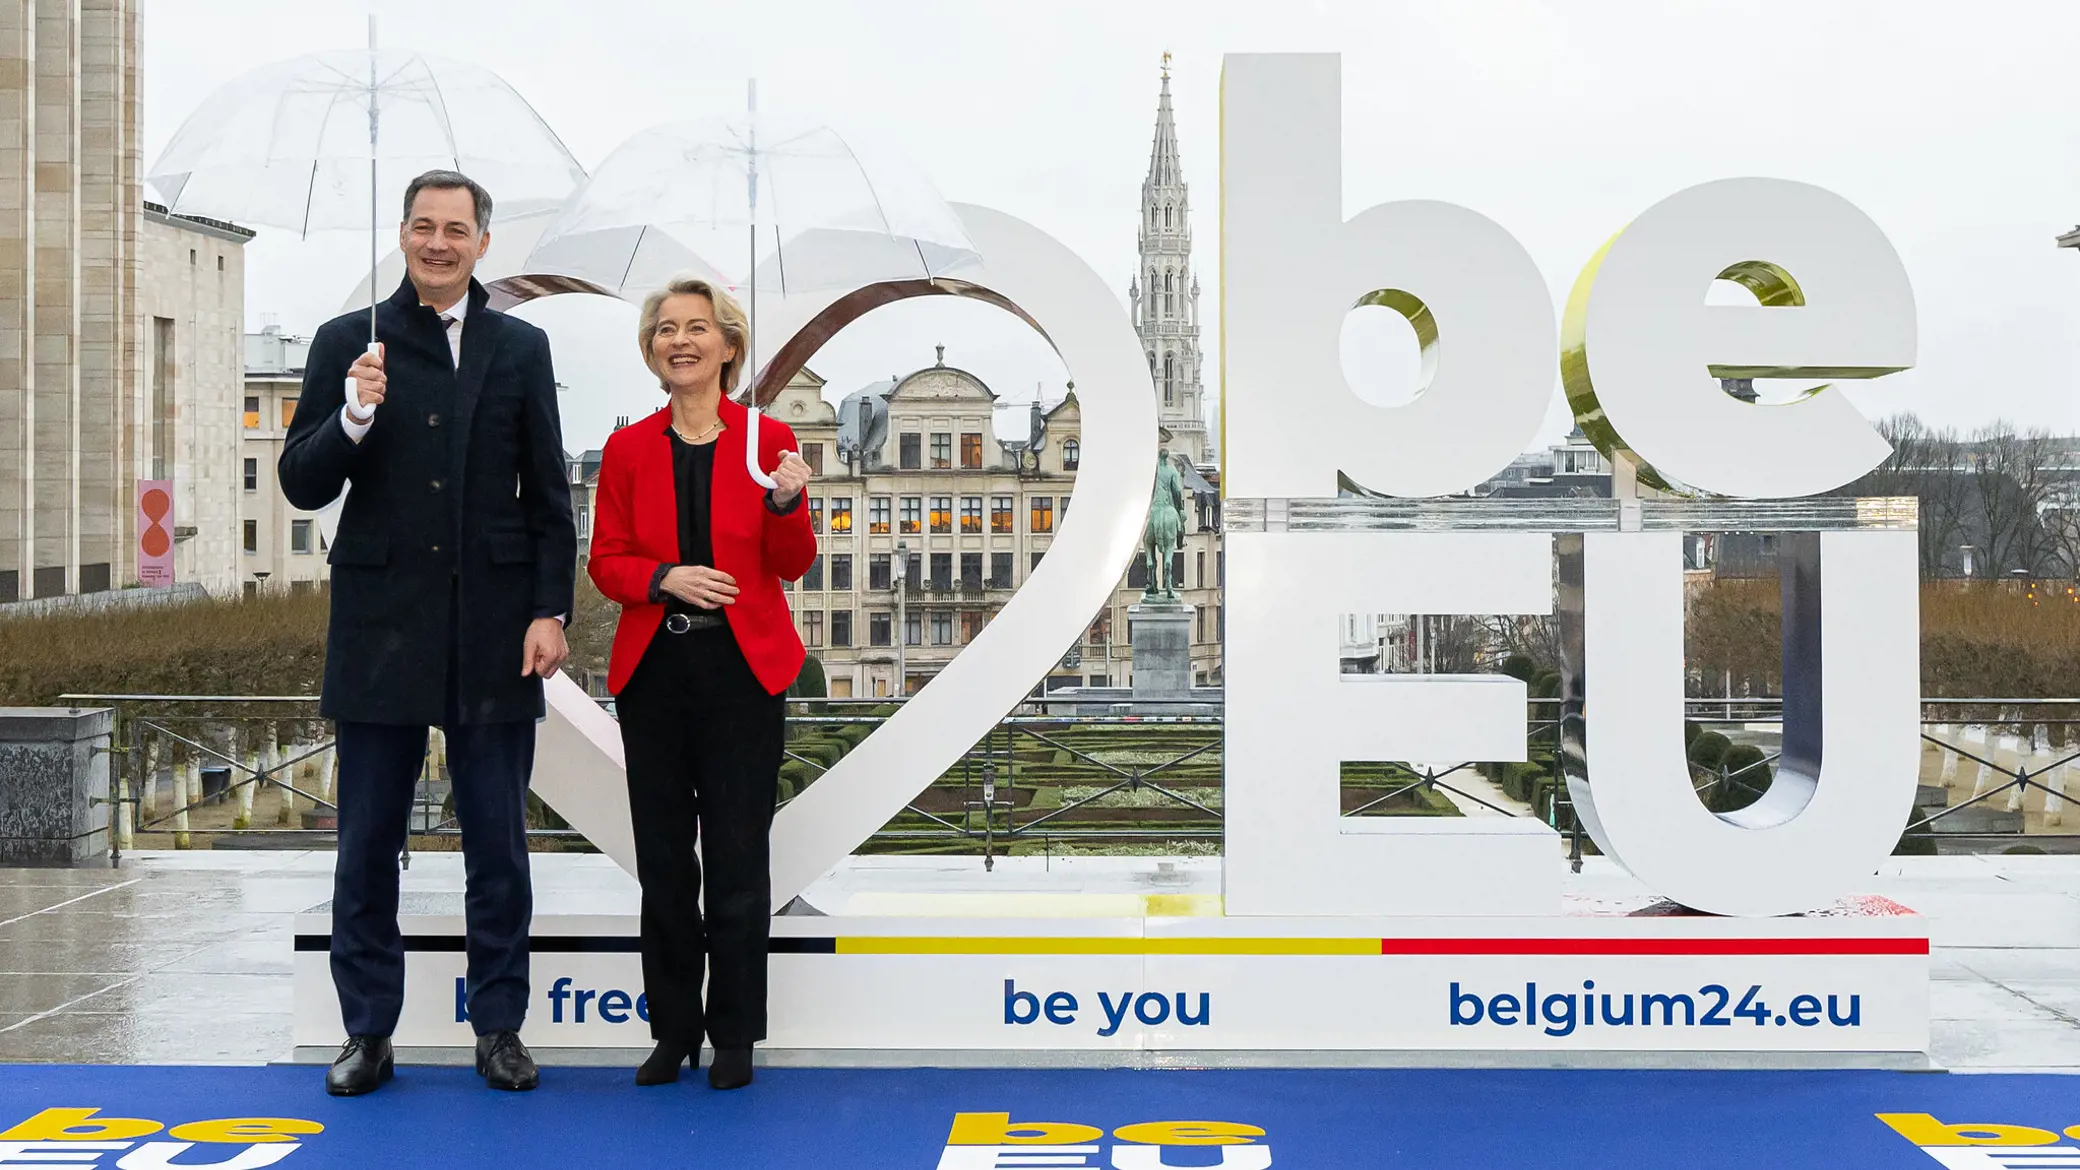 Photo of Ursula von der Leyen and Alexander De Croo stading with umbrellas welcoming the Belgian Presidency launch by a BE EU 2024 artistic logo sculpture in a grey and rainy Brussls. Photo credit @ Belgian Presidency.